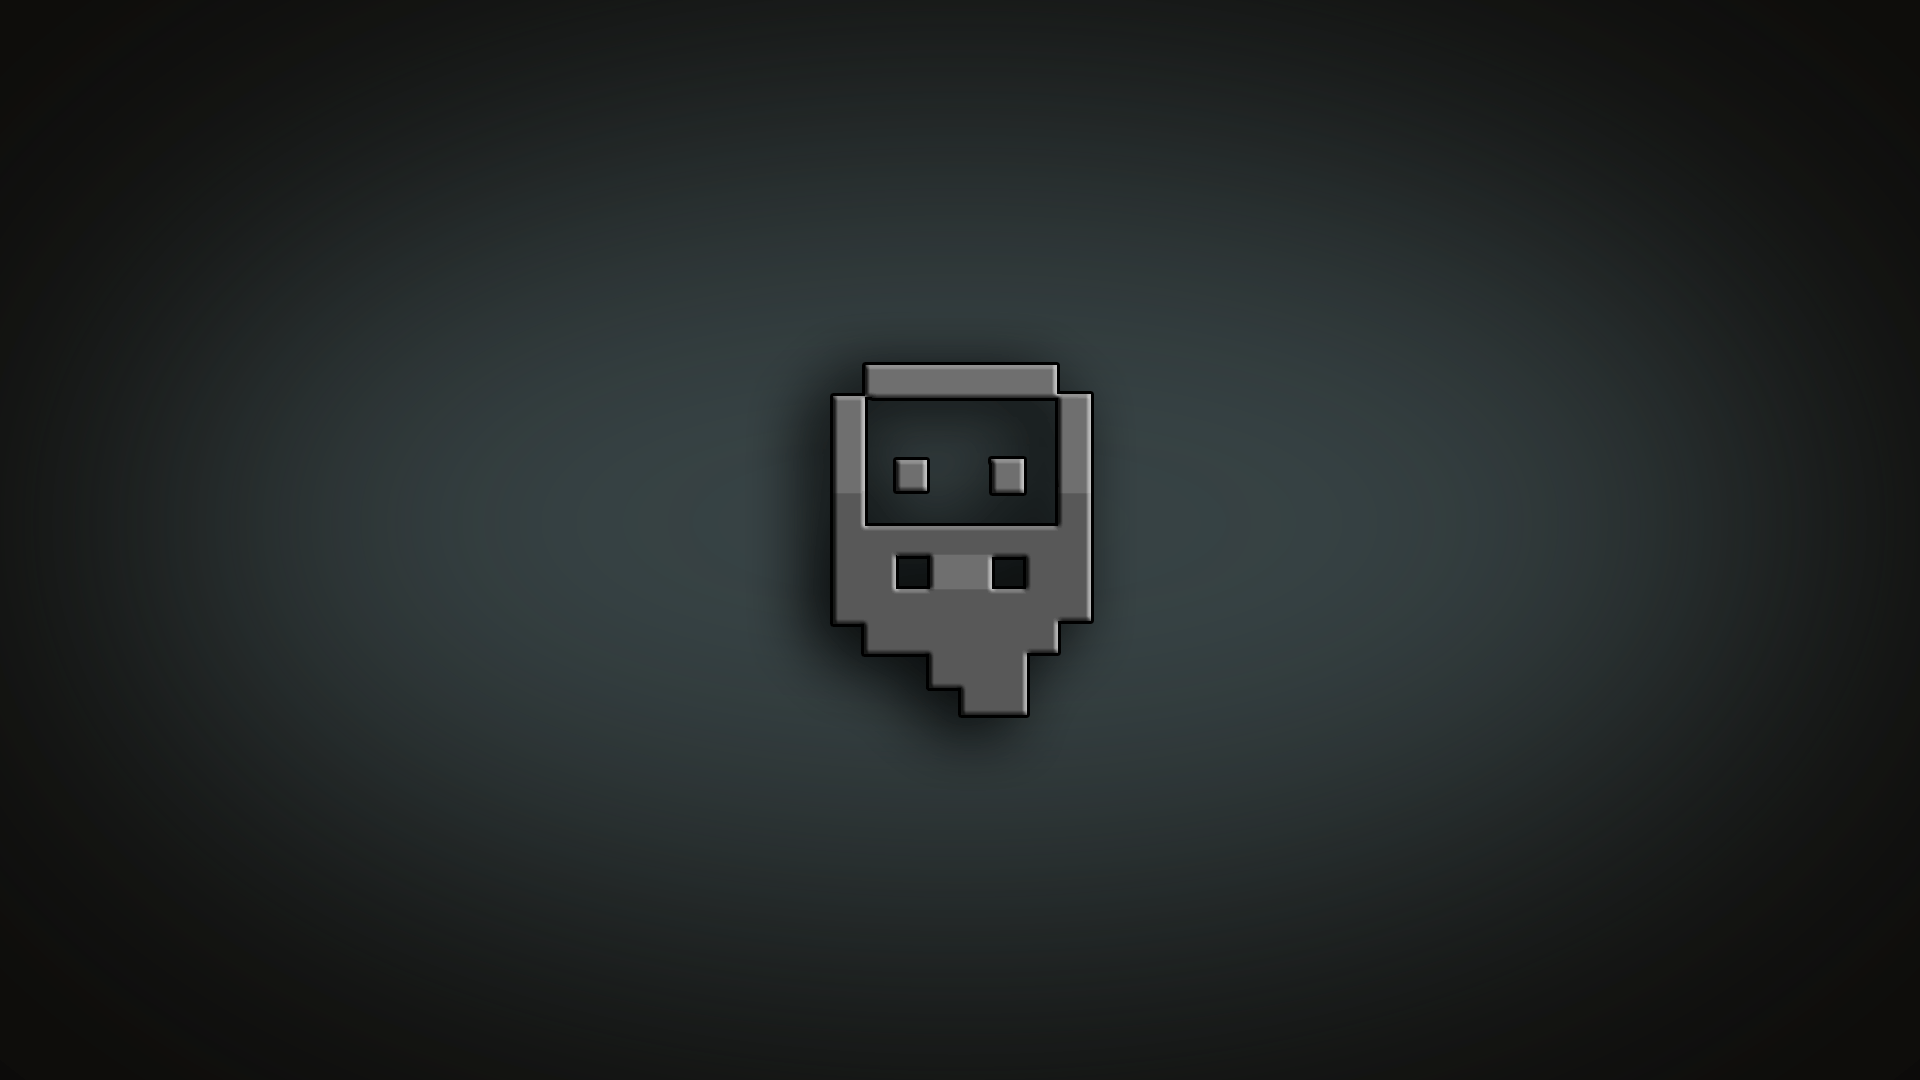 Tried my hand at making a minimal wallpaper for Dwarf Fortress